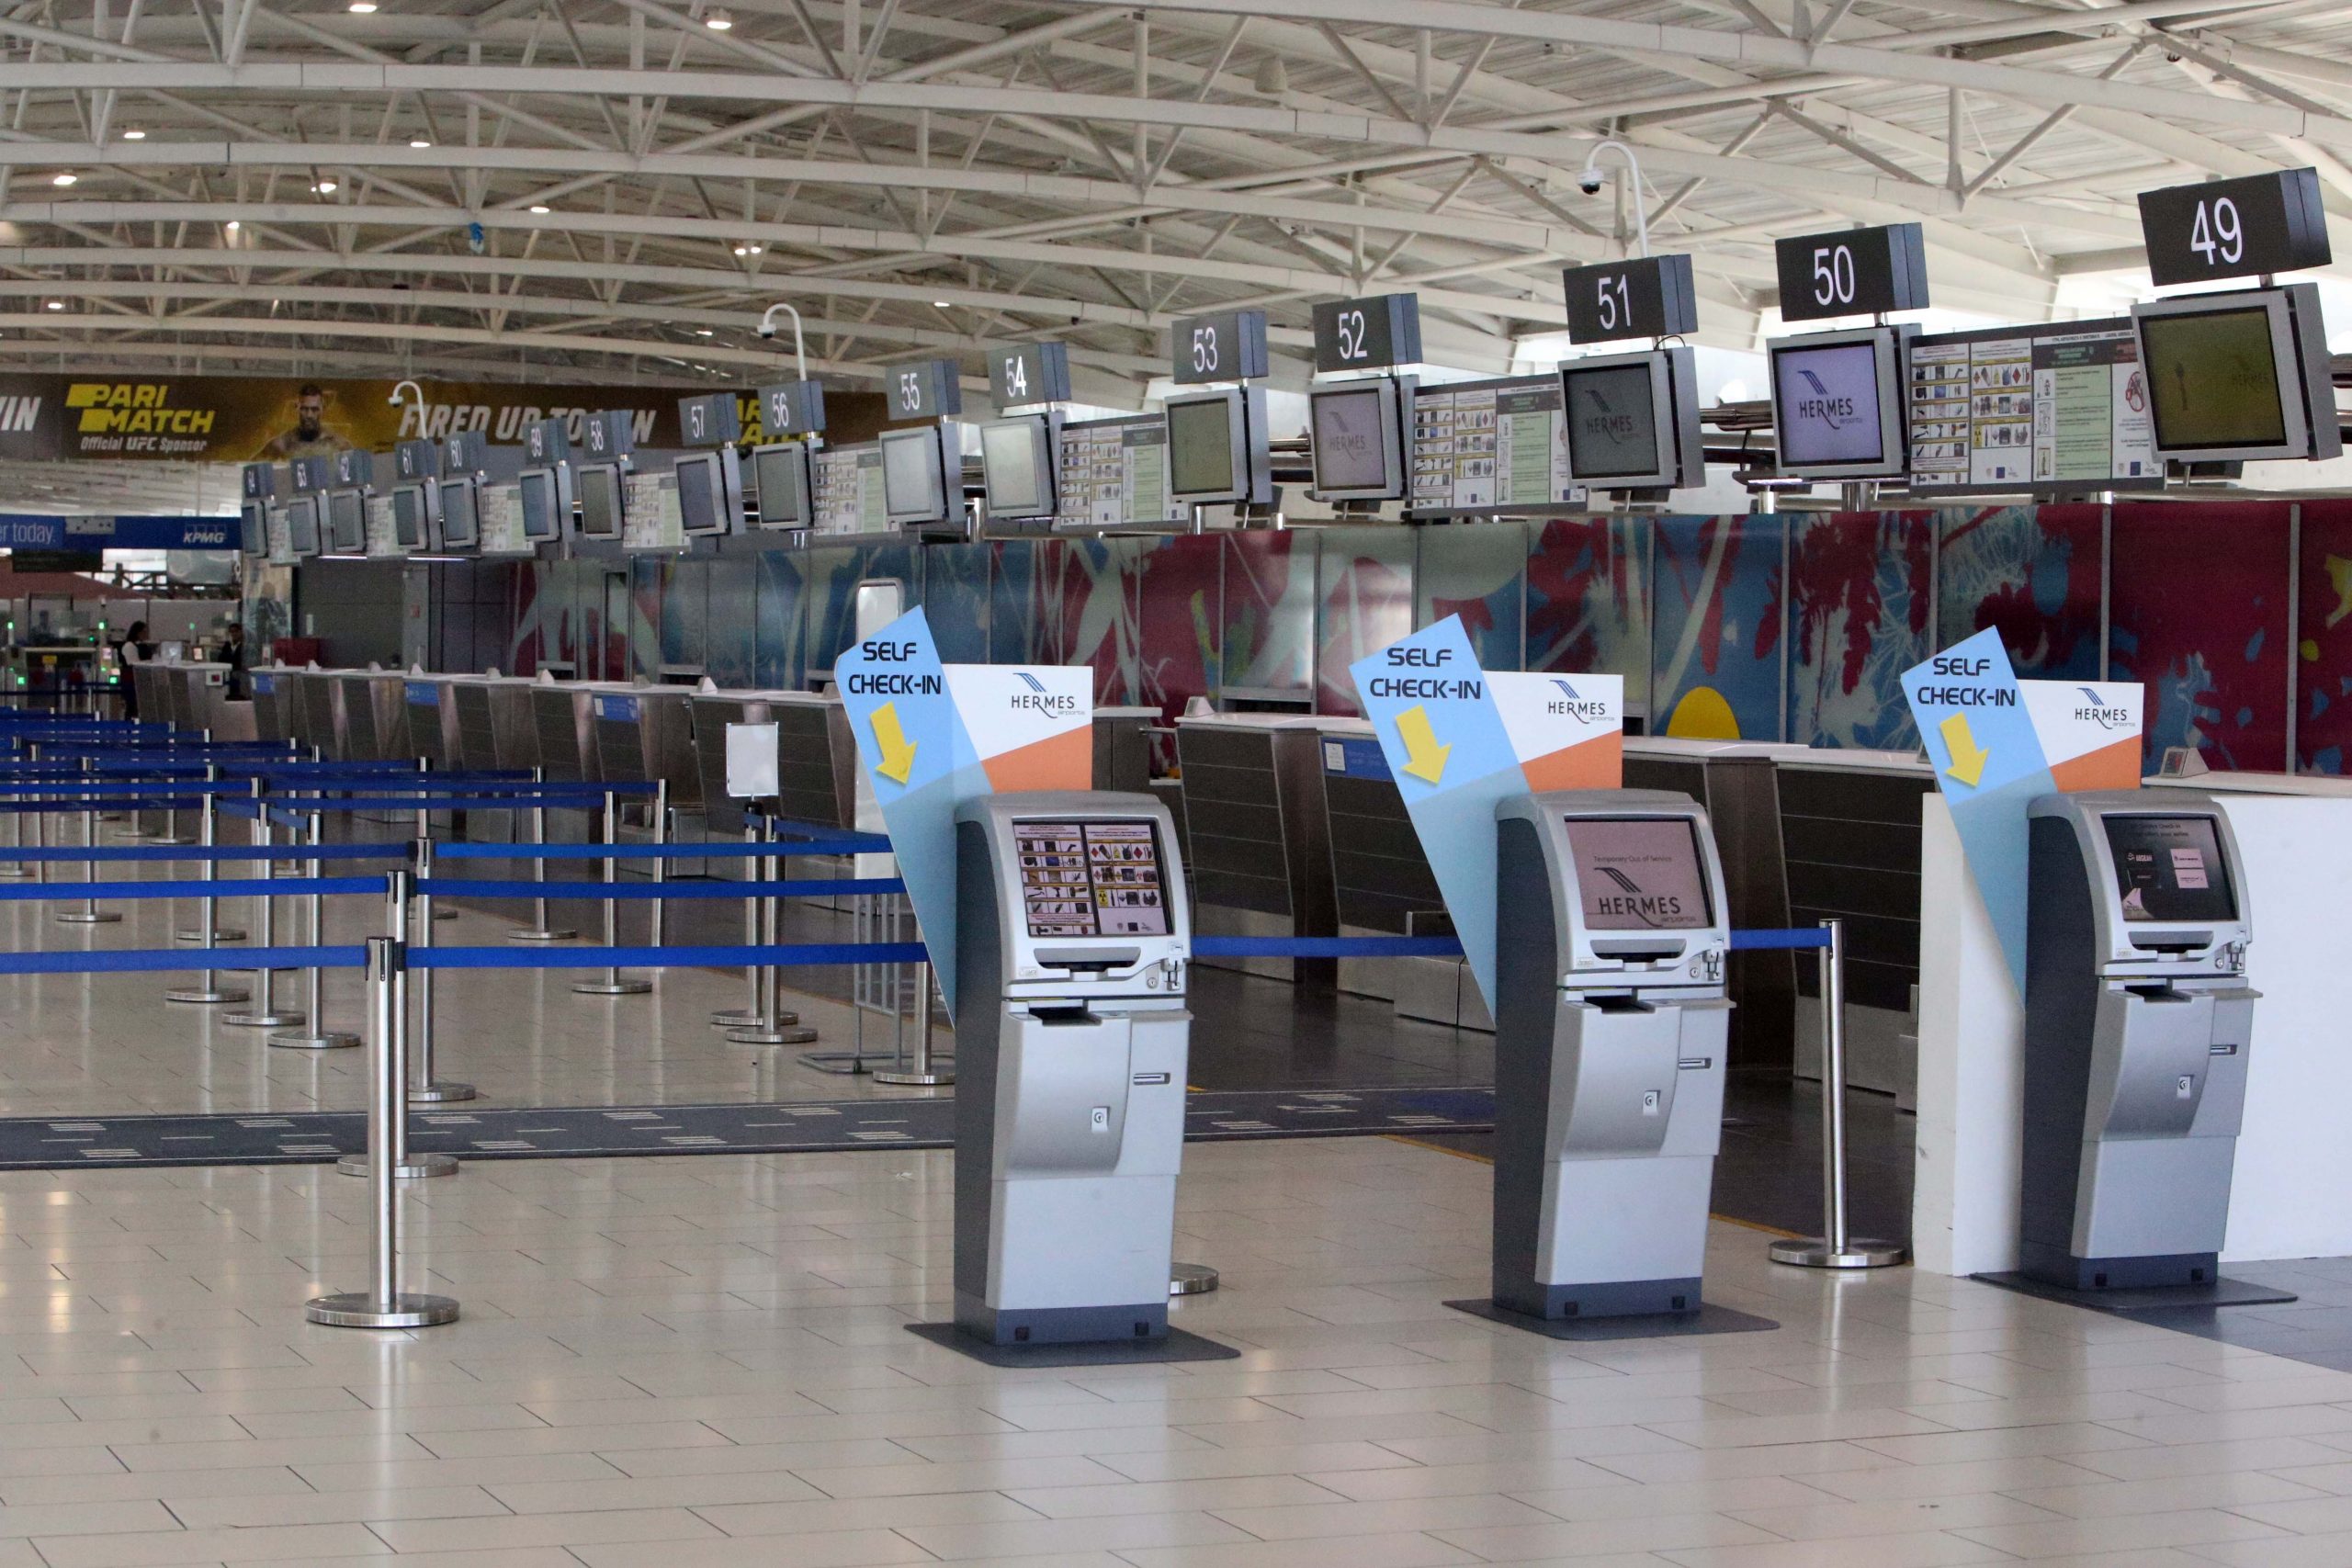 Cases of impersonation and fake documents at airports on the rise ...